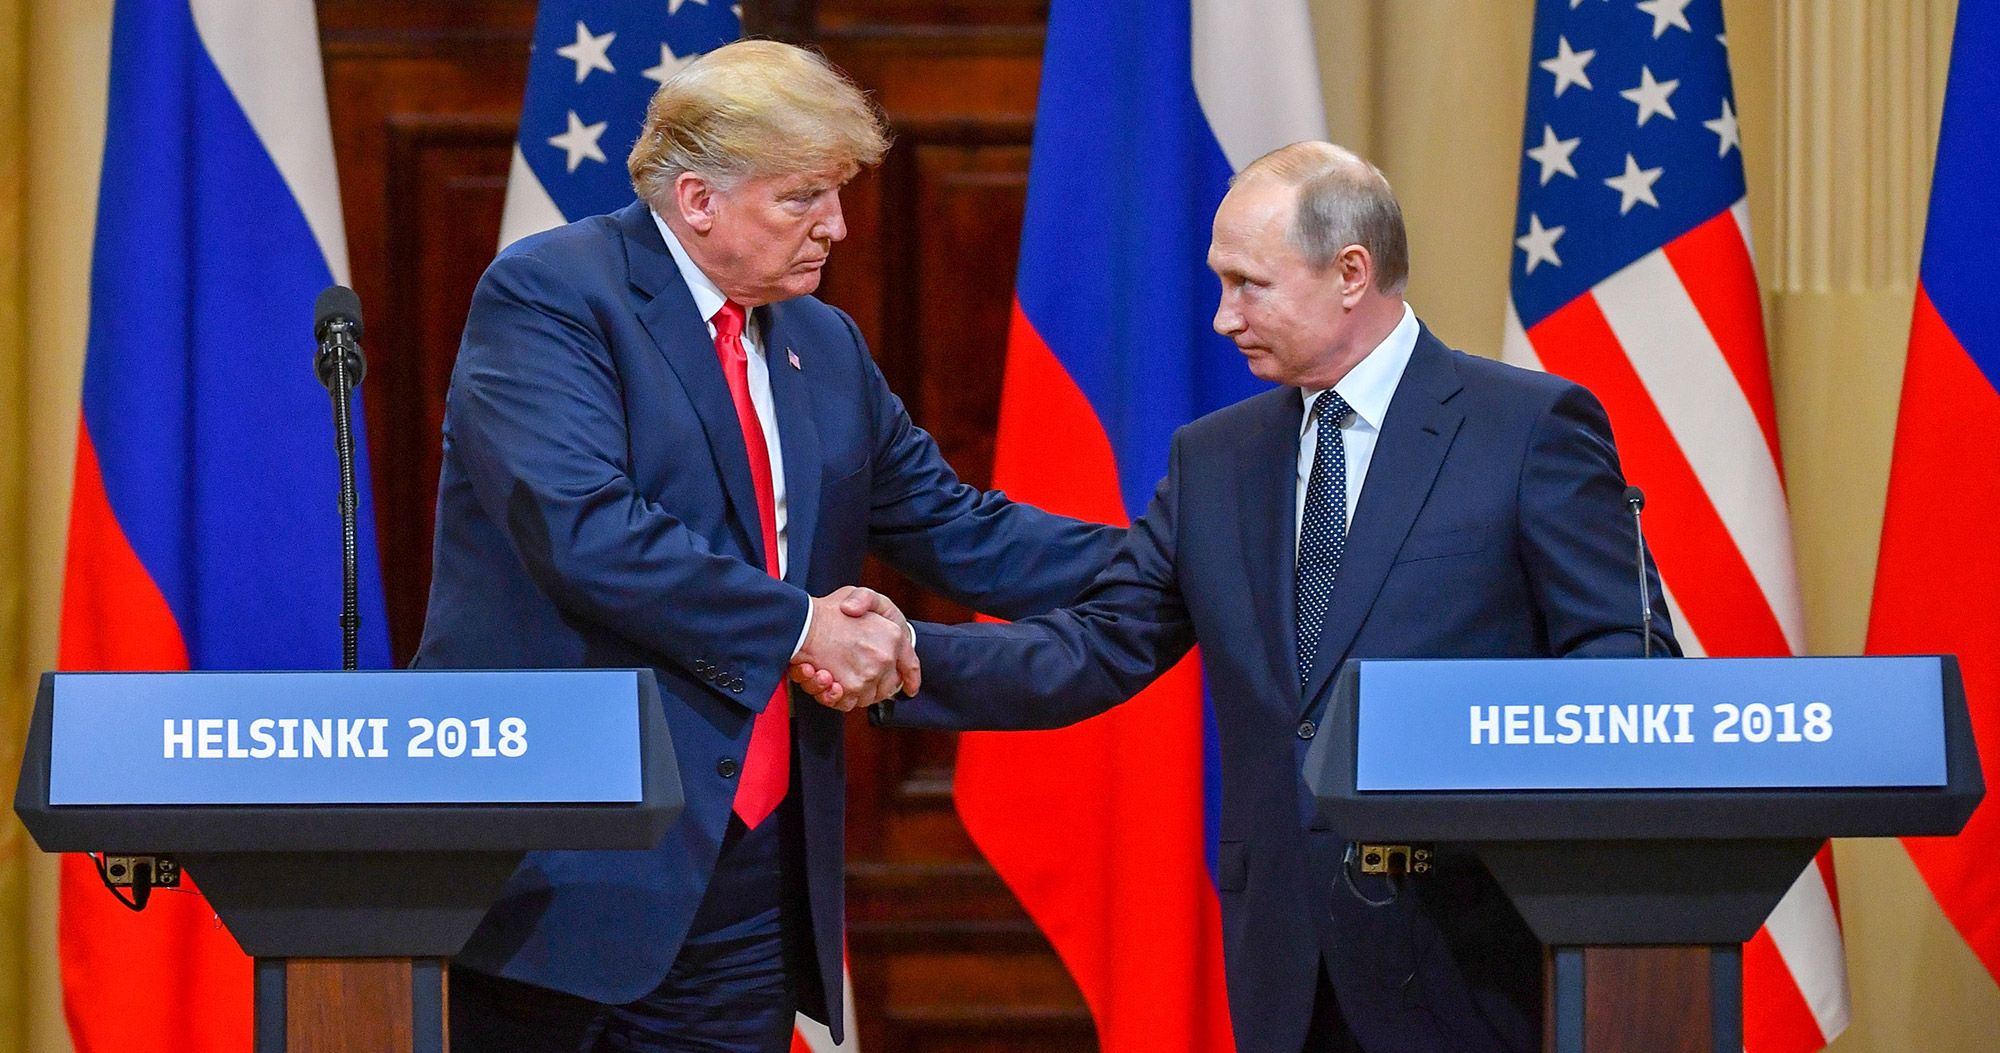 In picture: Trump meets with Putin